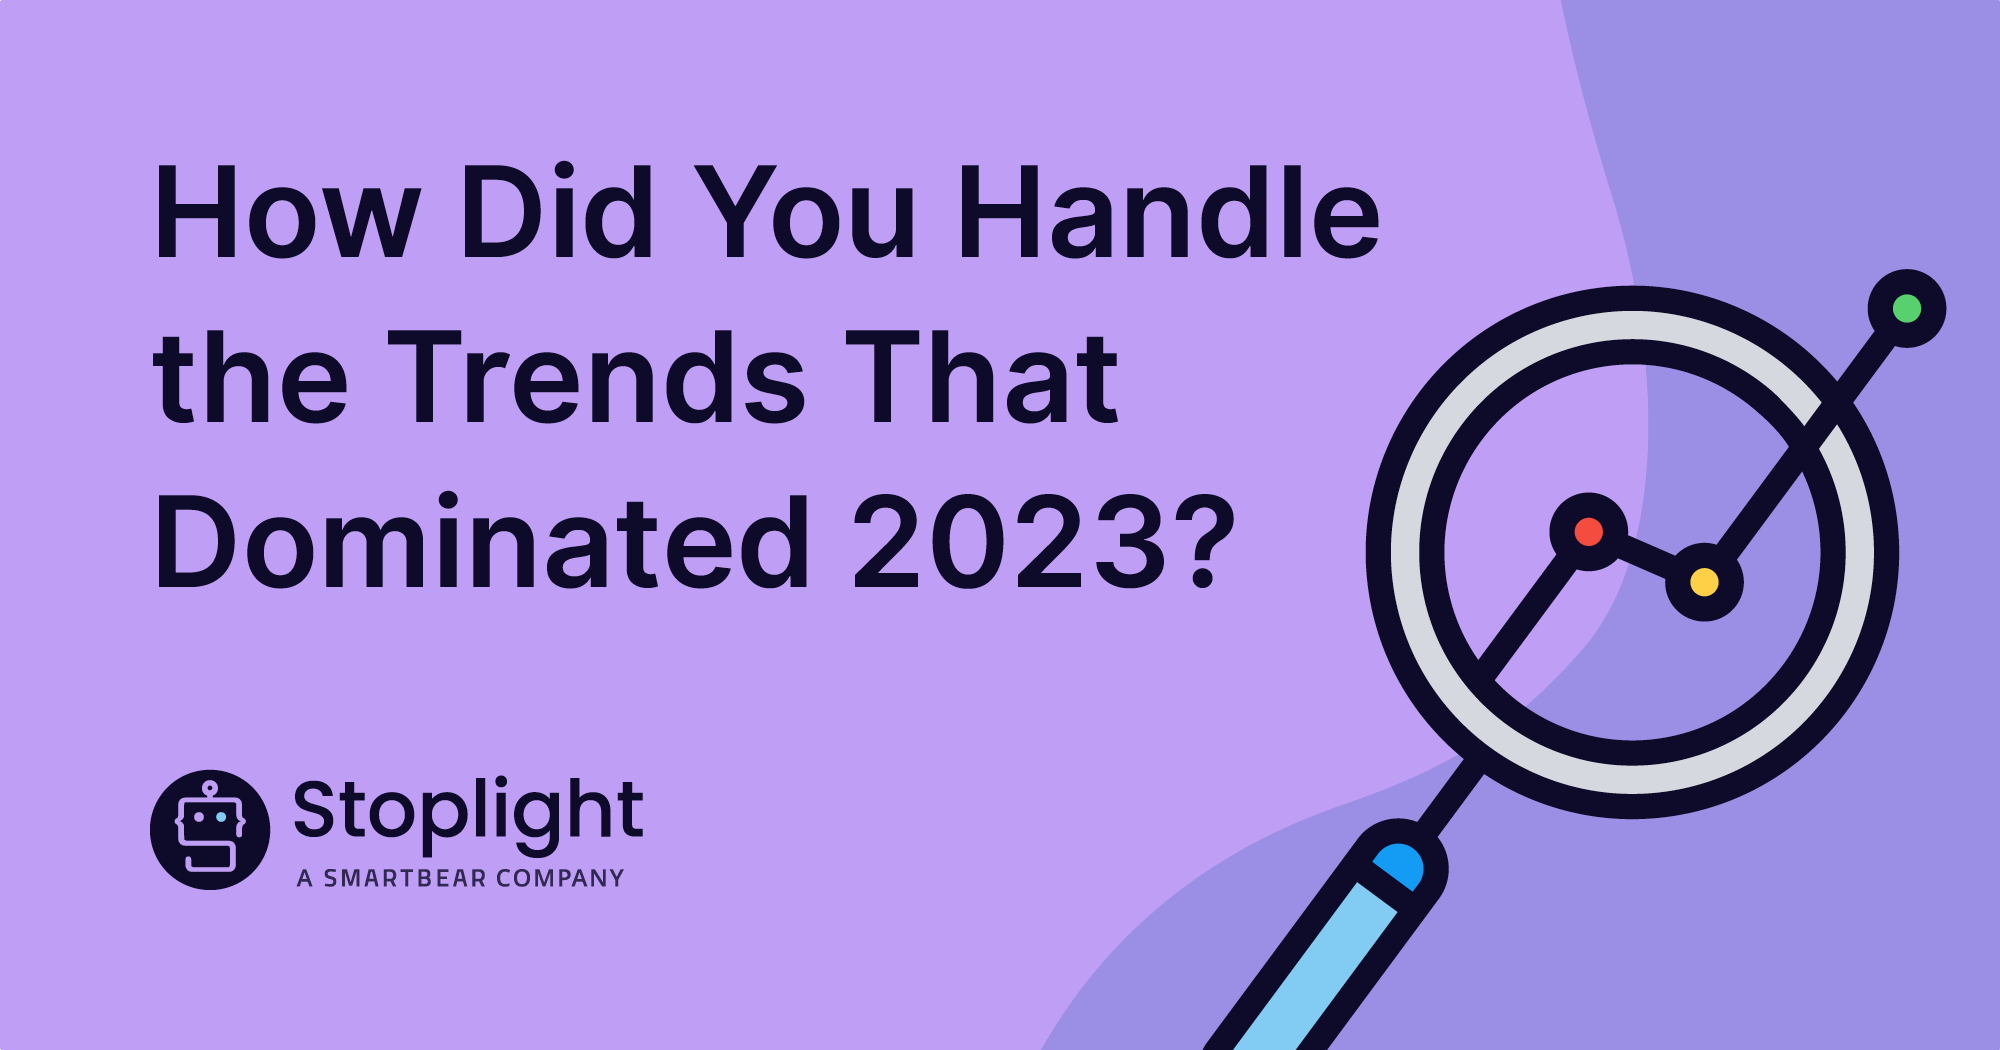 How Did You Handle the Trends That Dominated 2023?